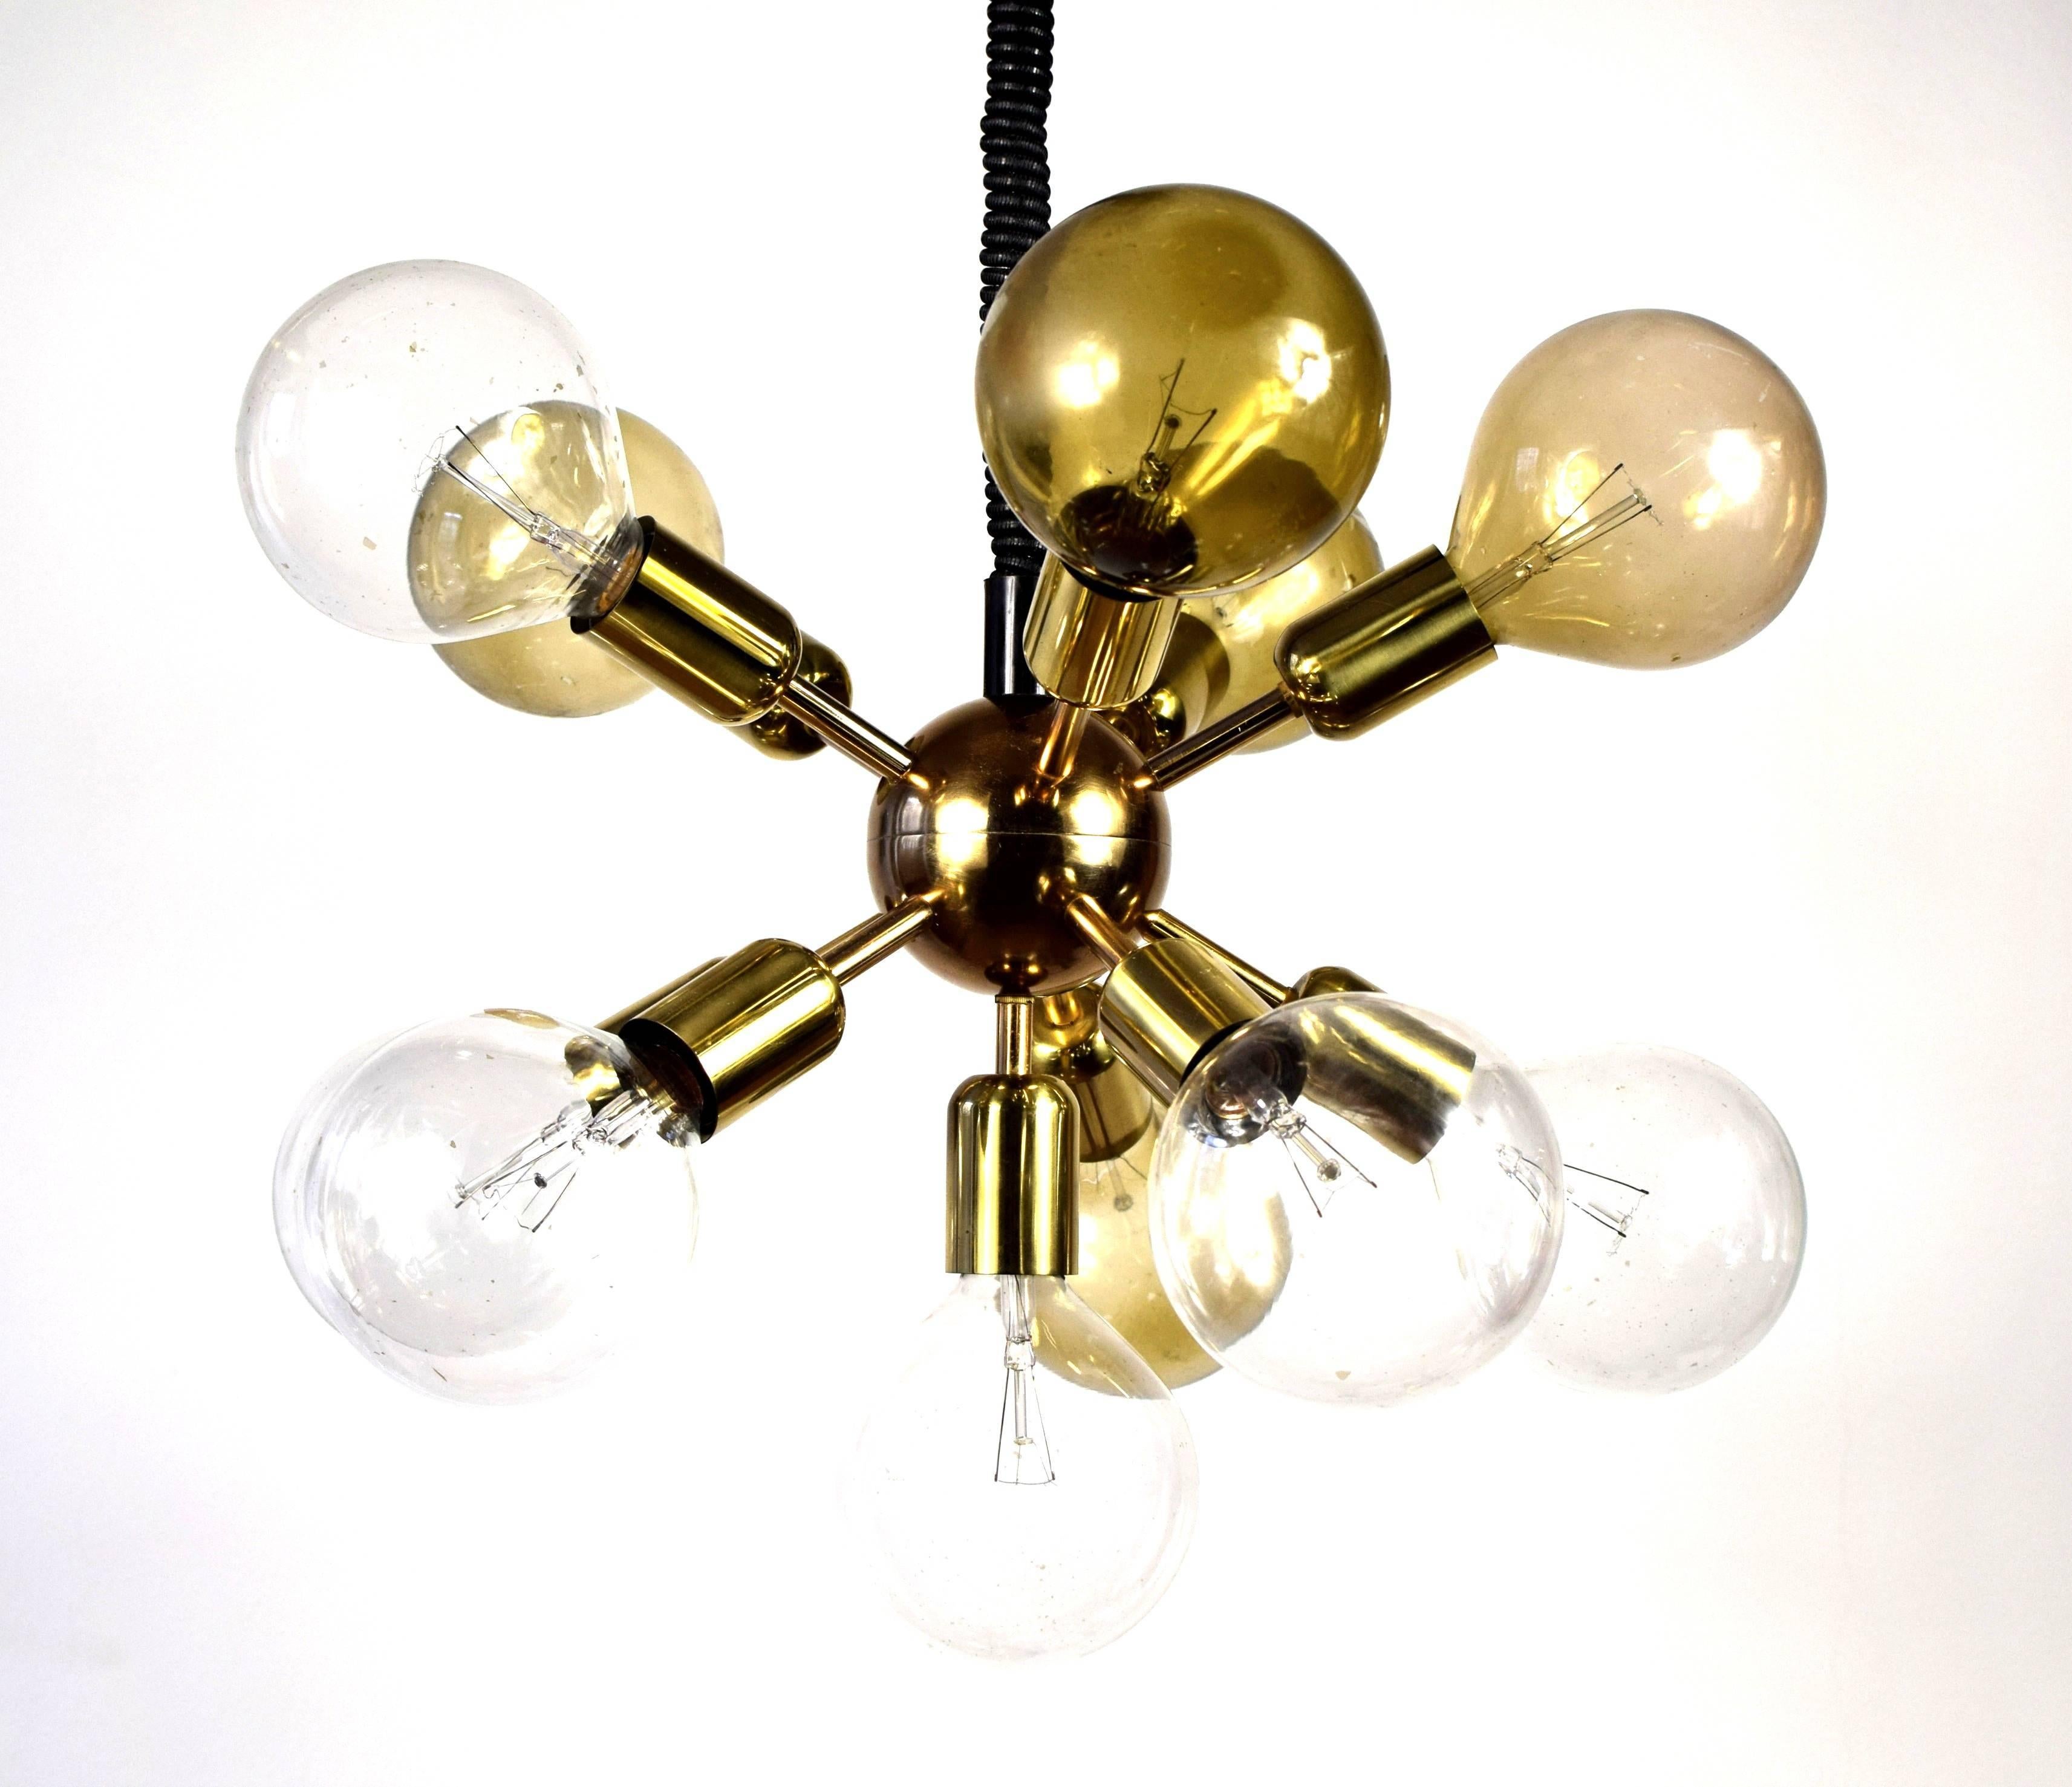 Very high quality chandelier. Material: gold-plated brass. 11 Globe bulbs with 125 mm diameter (not included in offer). 
Adjustable height (circa 80-130 cm)
Excellent condition.

Diameter: 60 cm (incl. bulbs)

I can also offer suitable bulbs